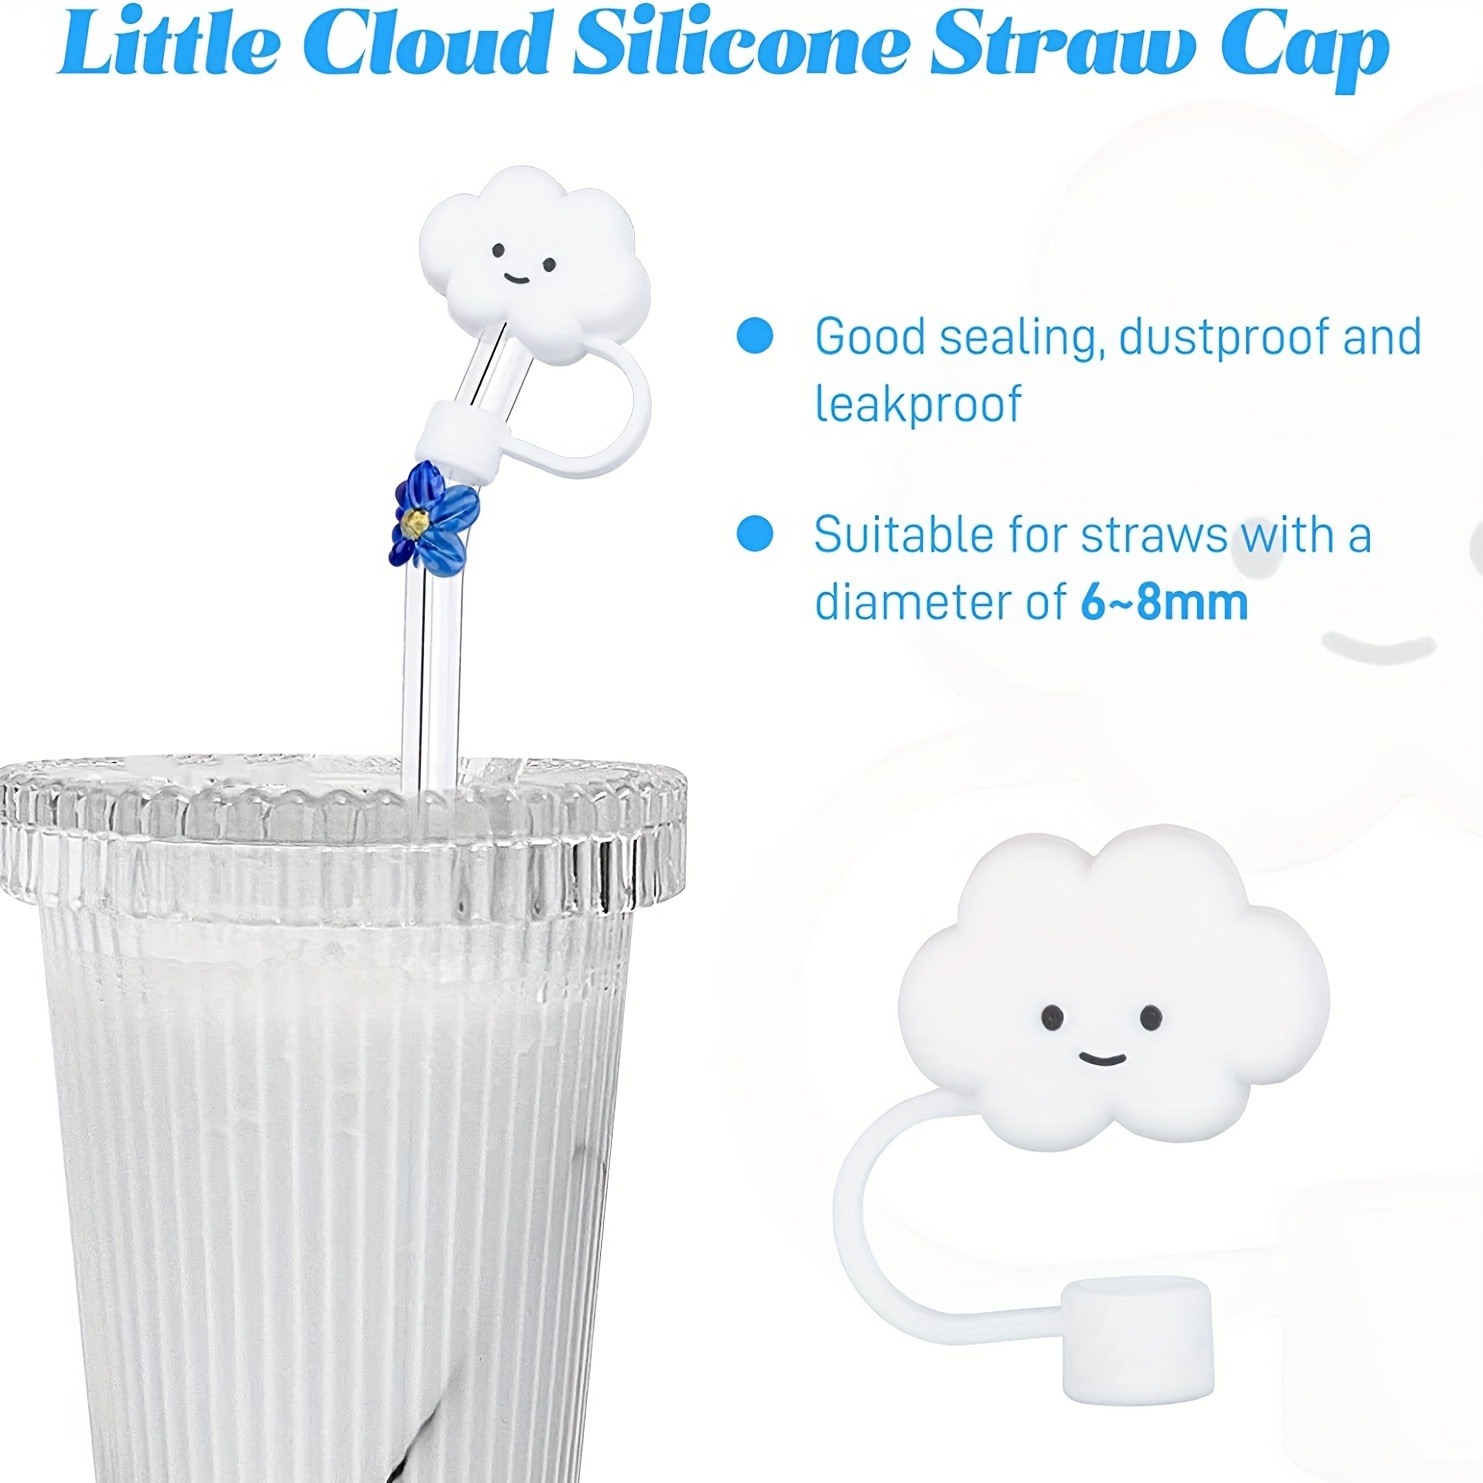 Cute Silicone Straw Covers Cap Silicone Straw Plug, Reusable Cartoon Cloud  Straw Tips Drinking Dust Cap, Creative Cup Accessories 6-8mm Straw Tools